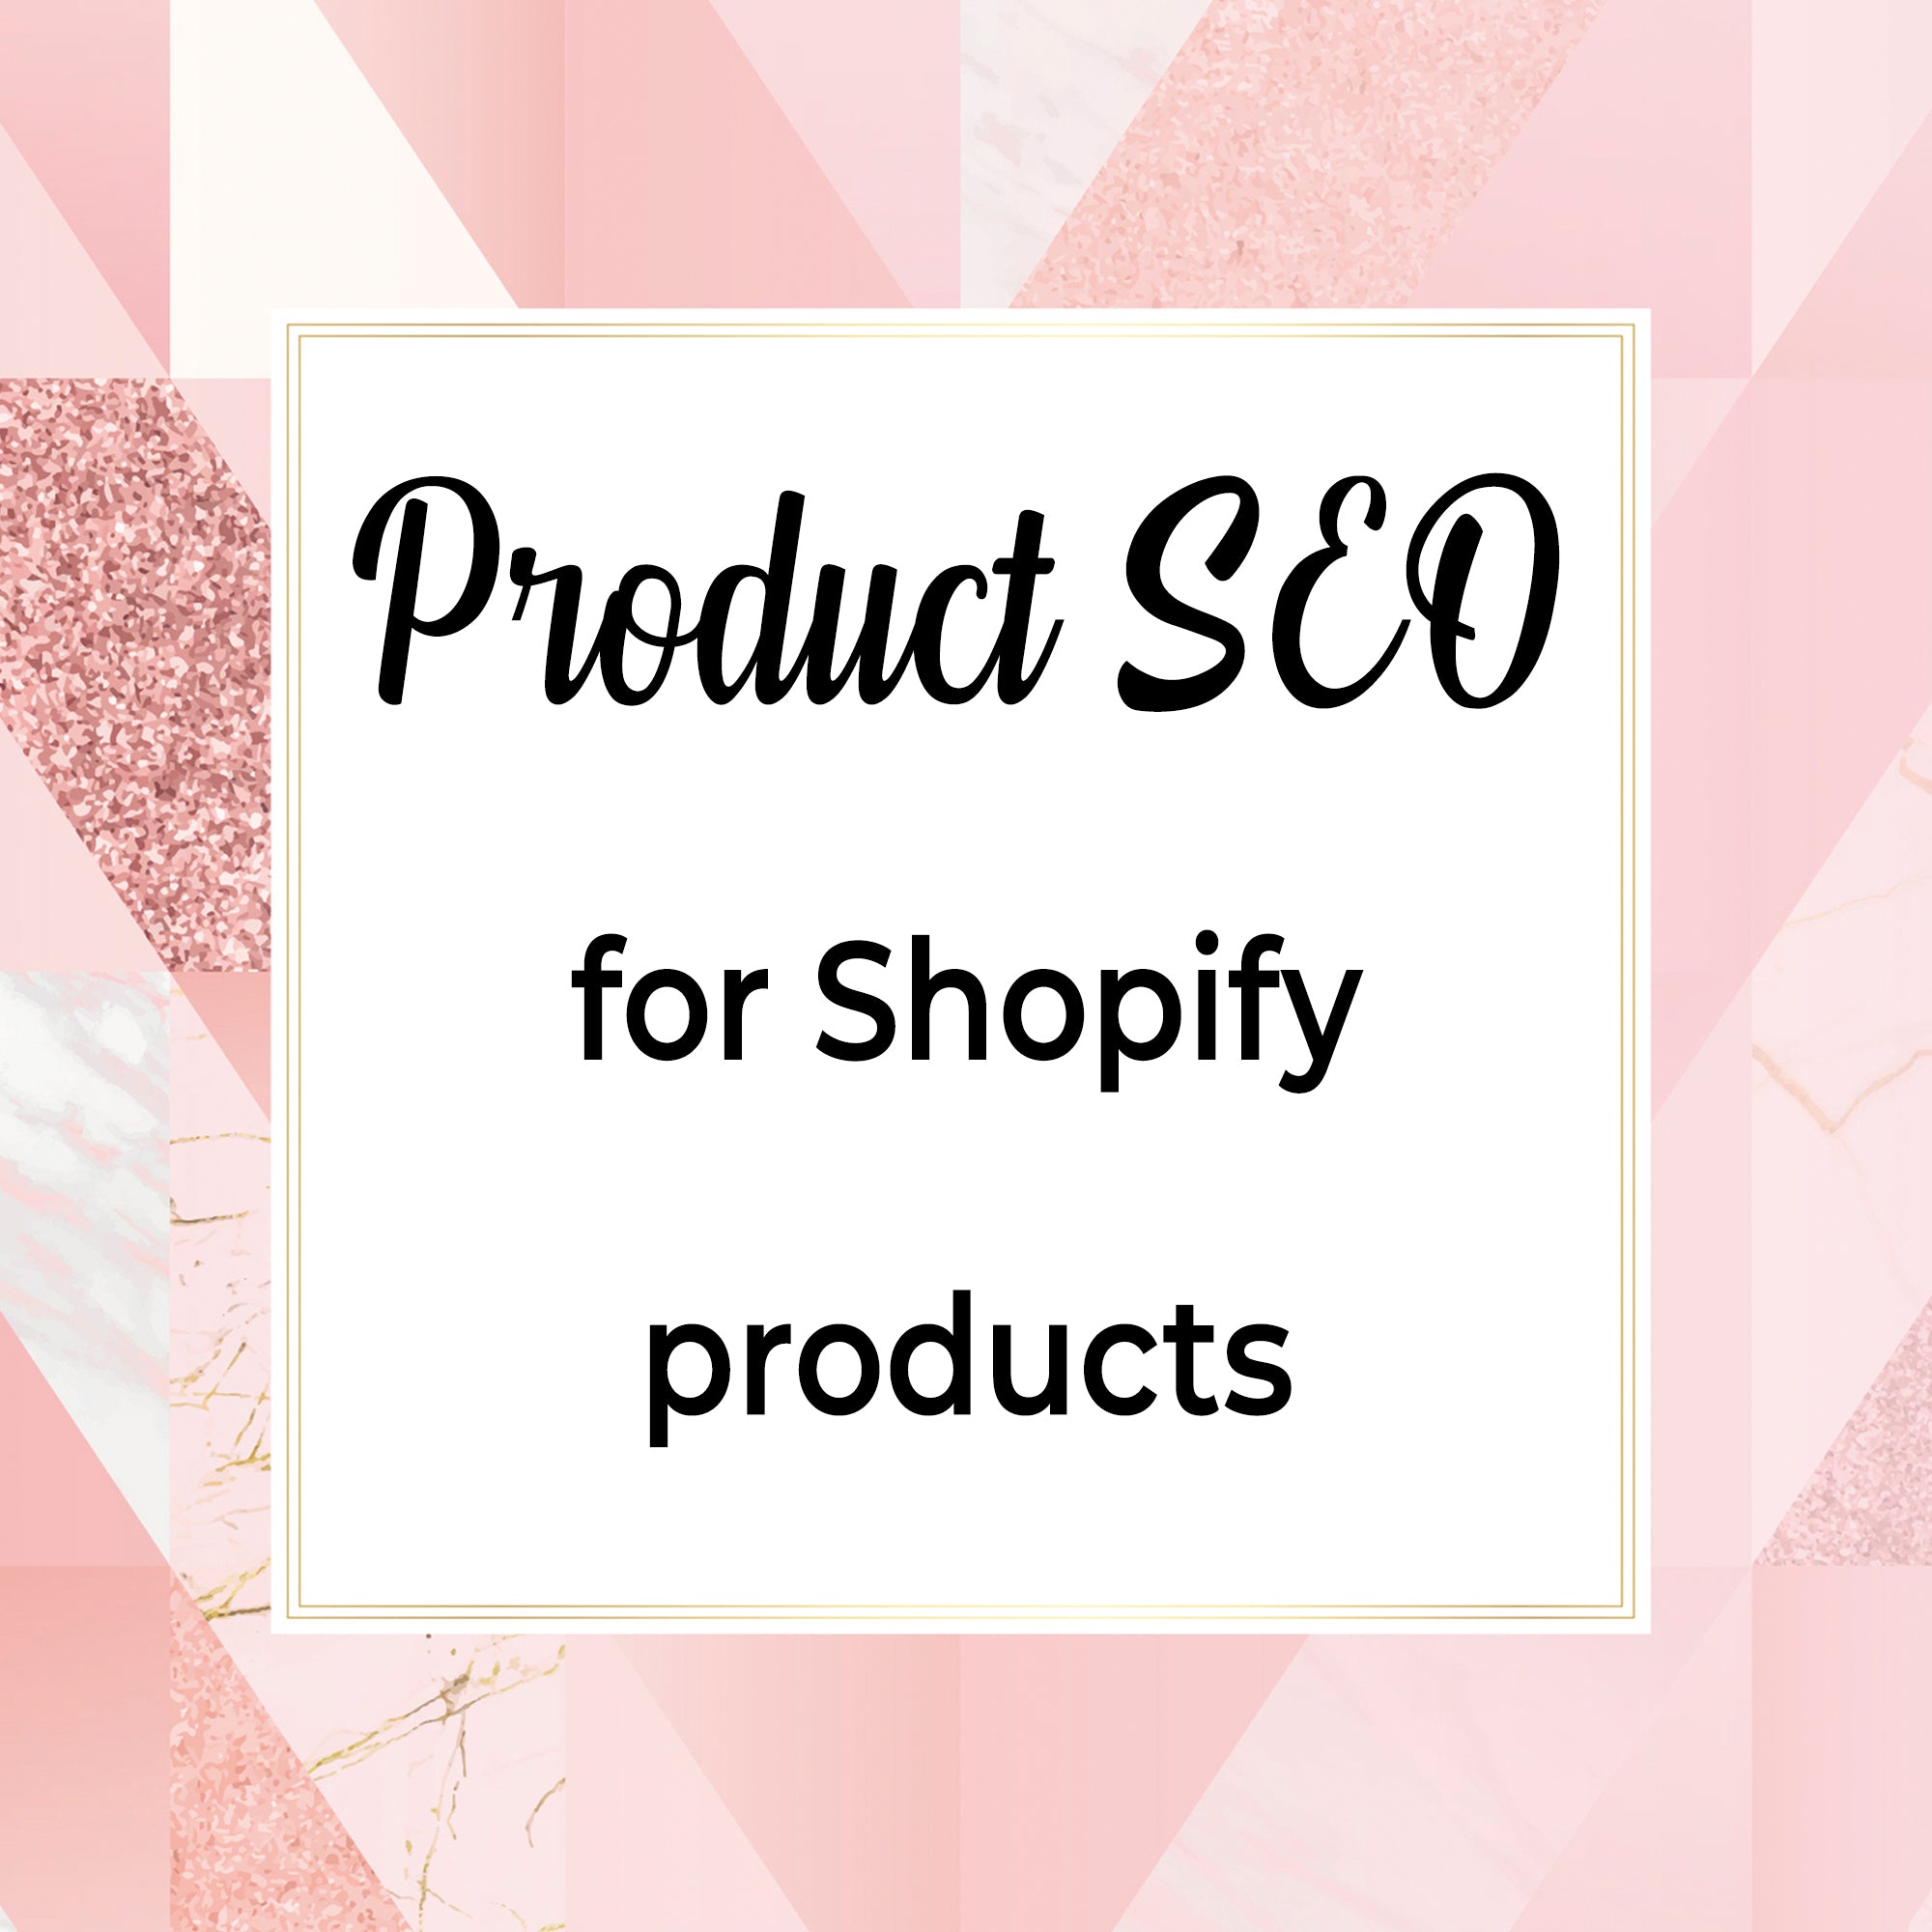 Product SEO for shopify products